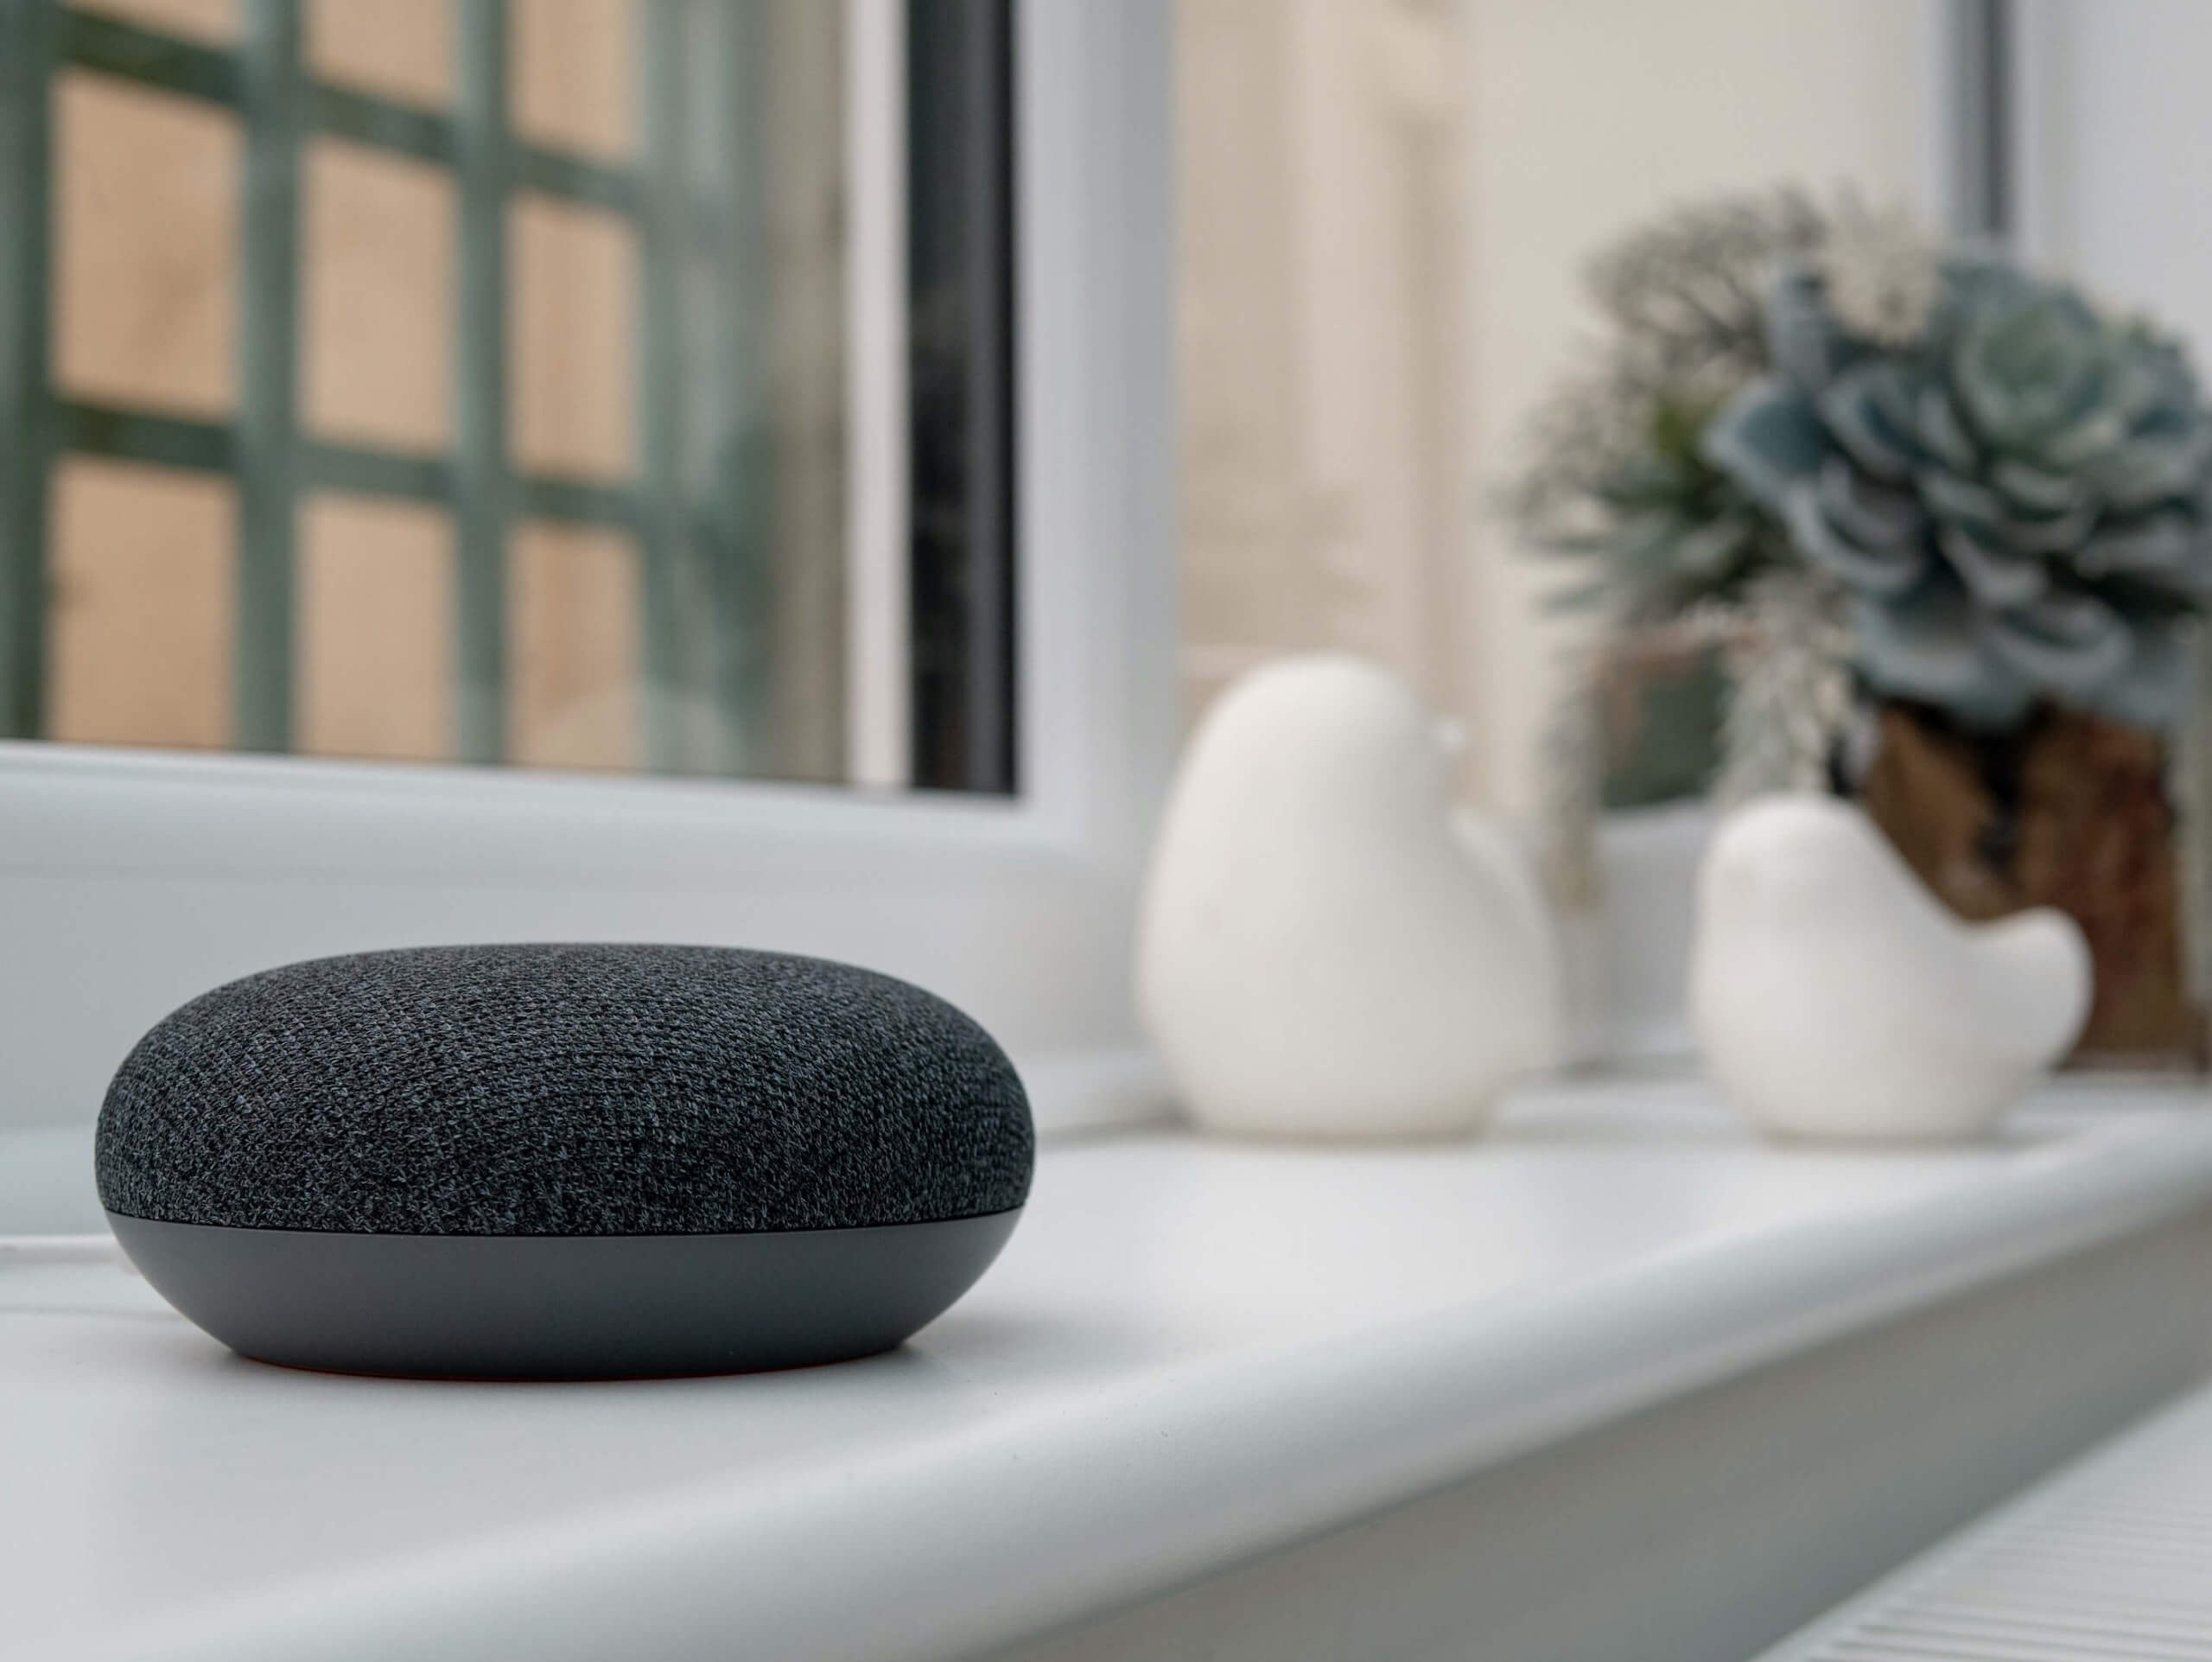 Latest Google Home firmware update reportedly bricked some devices